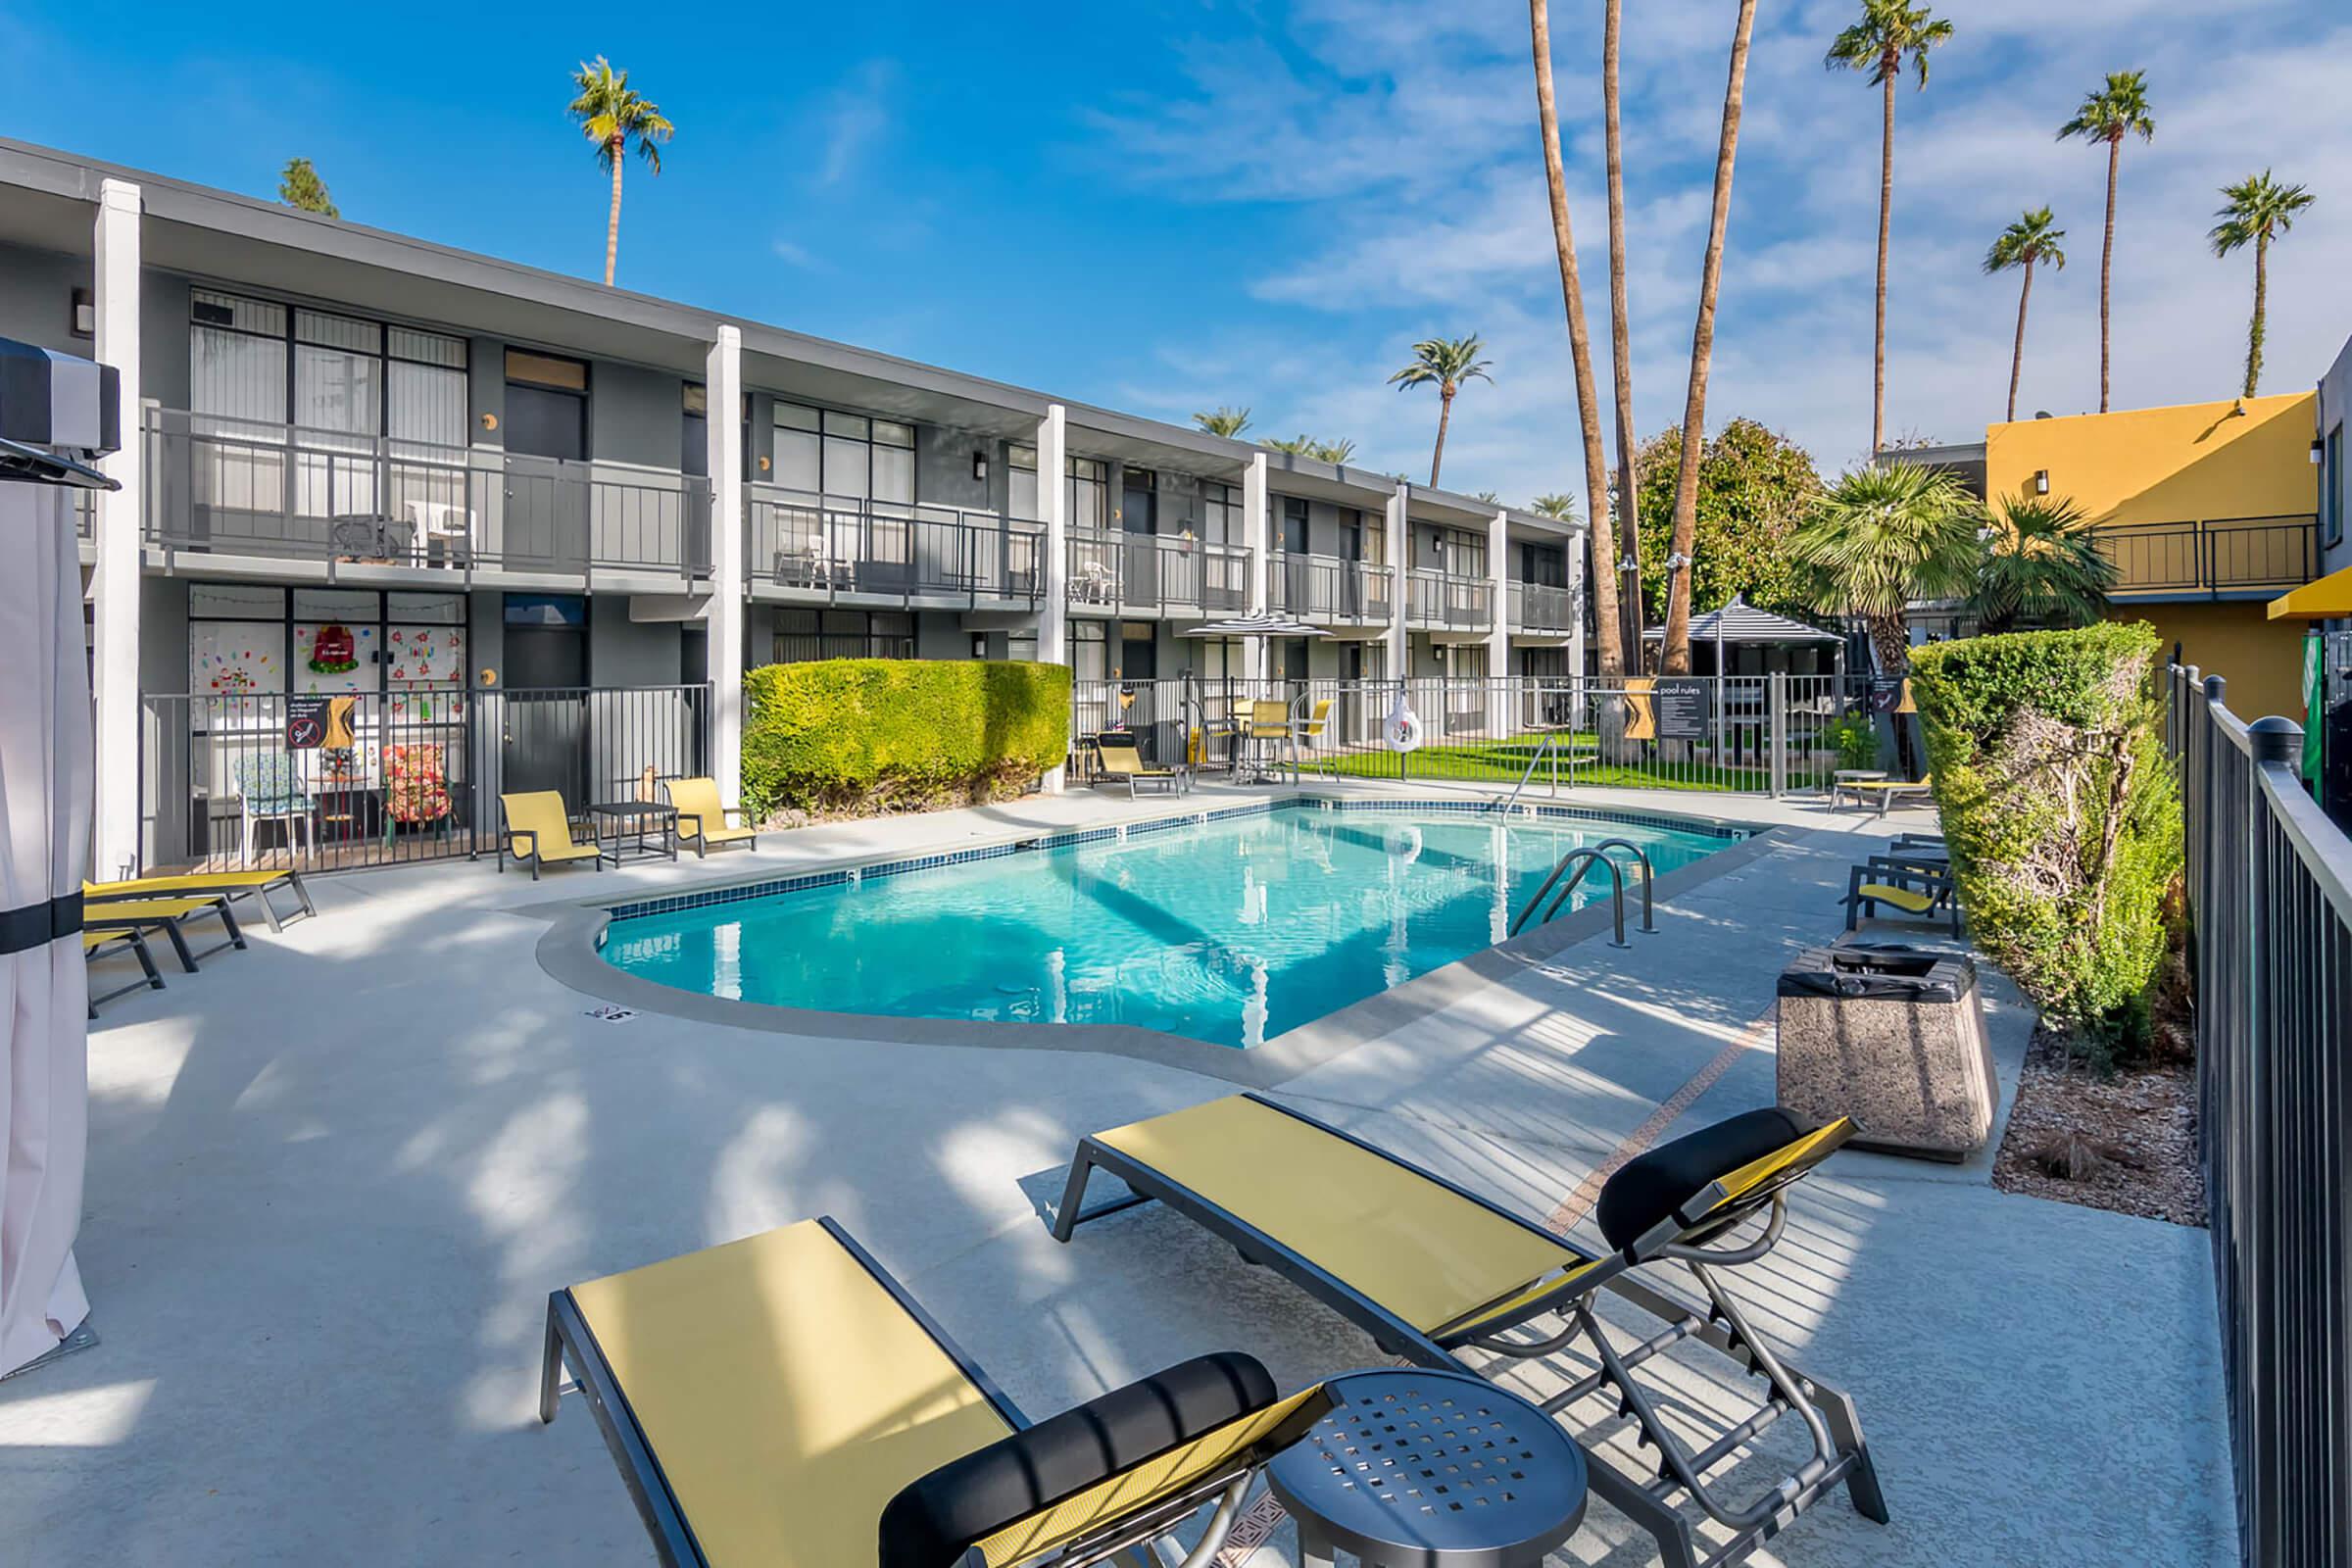 Shimmering Swimming Pool with Poolside Wi-Fi - The Marlowe Apartments - Phoenix - Arizona